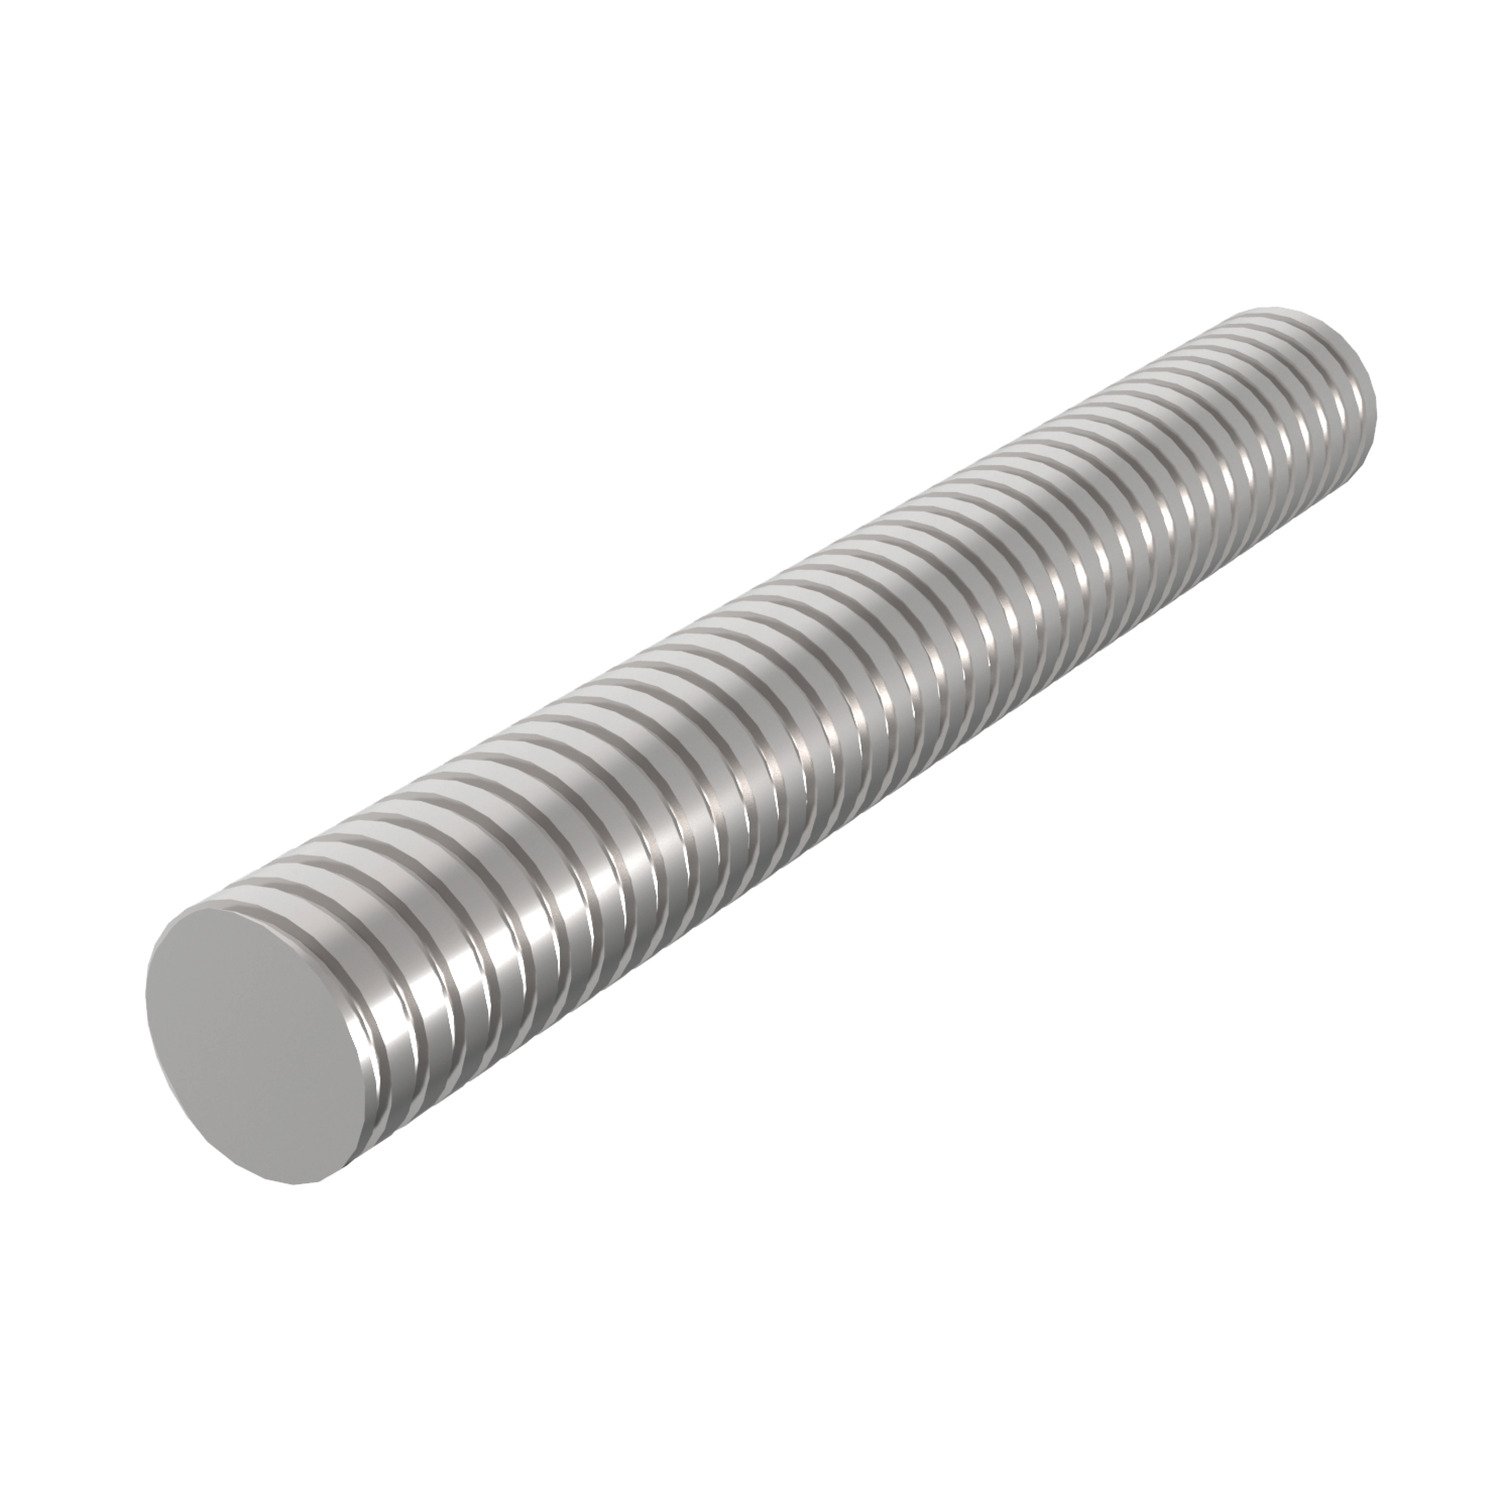 Product L1322, Stainless 316  Lead Screws right hand thread / 